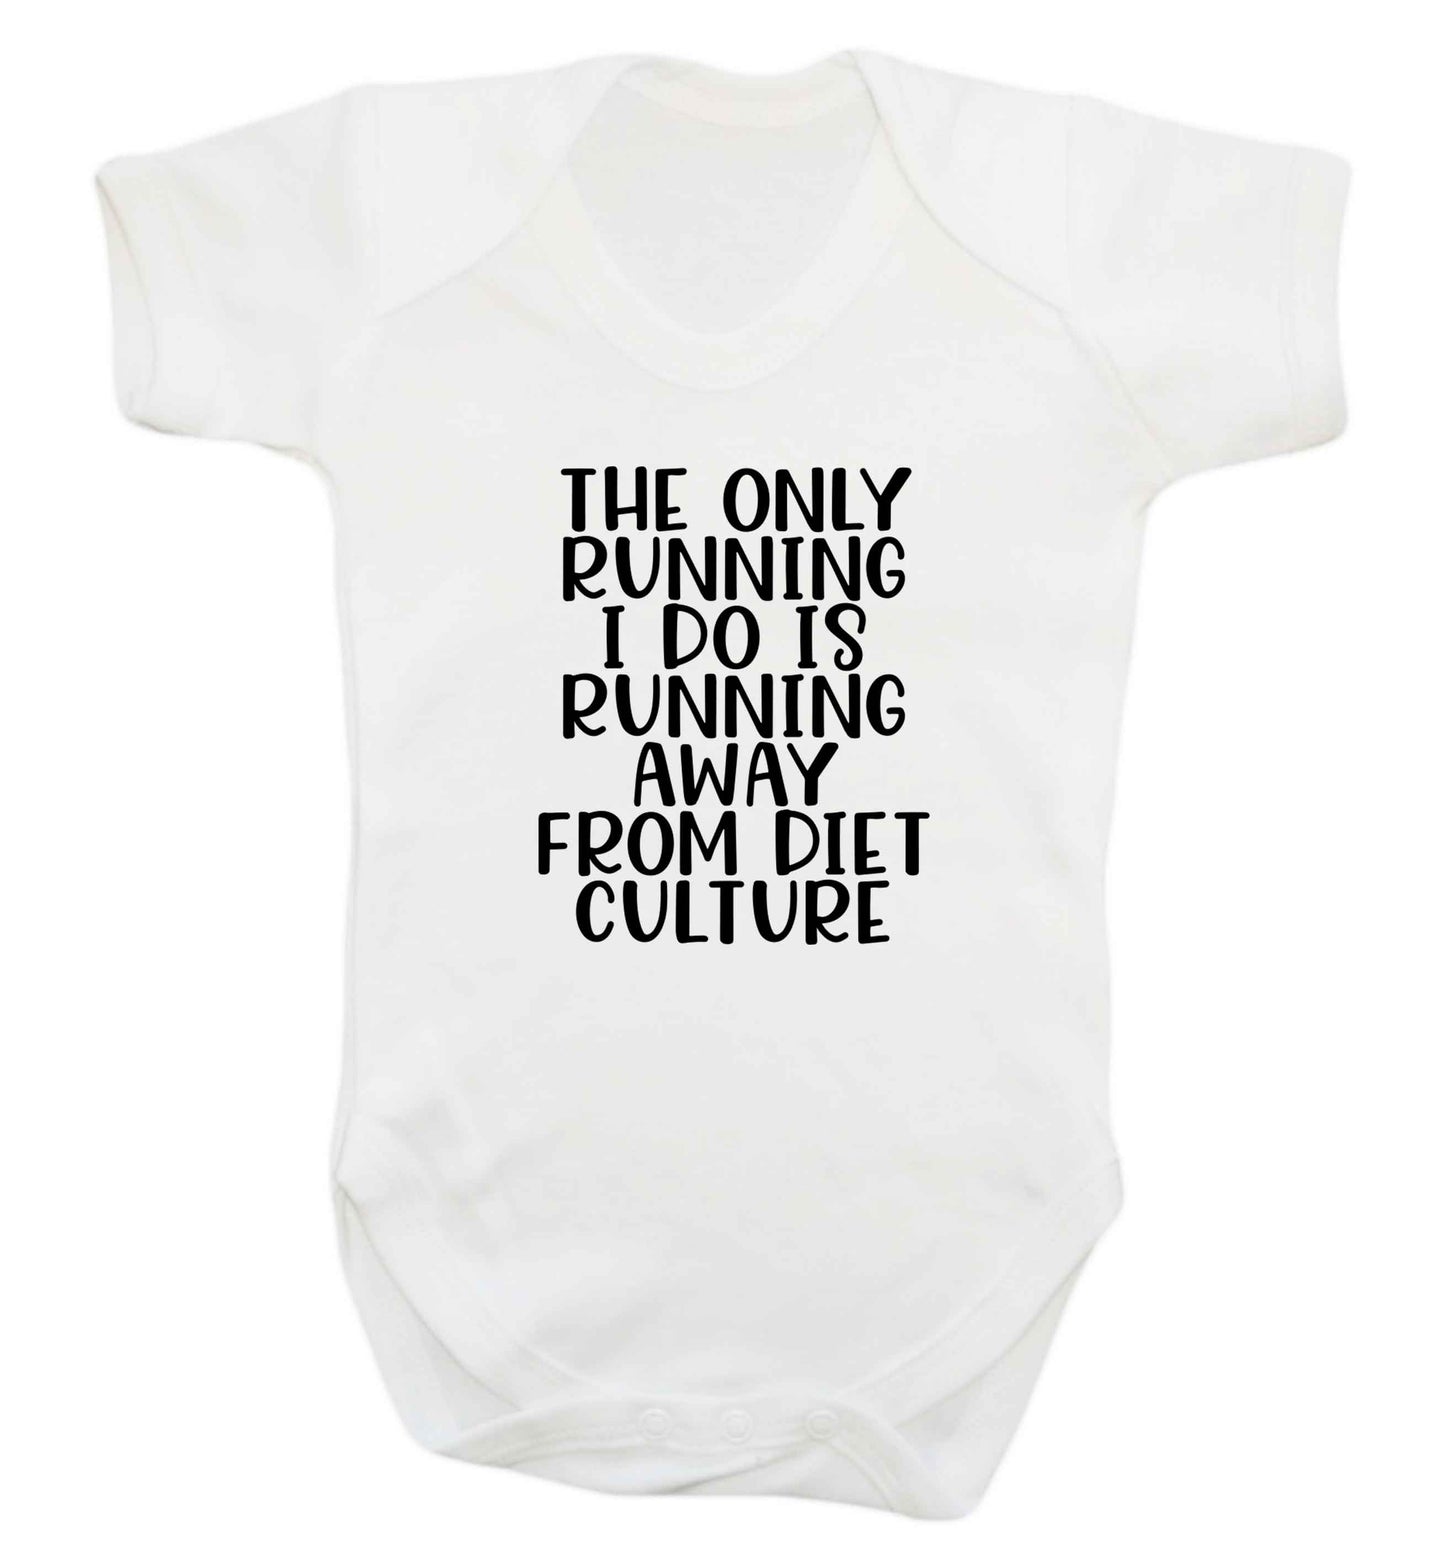 The only running I do is running away from diet culture baby vest white 18-24 months